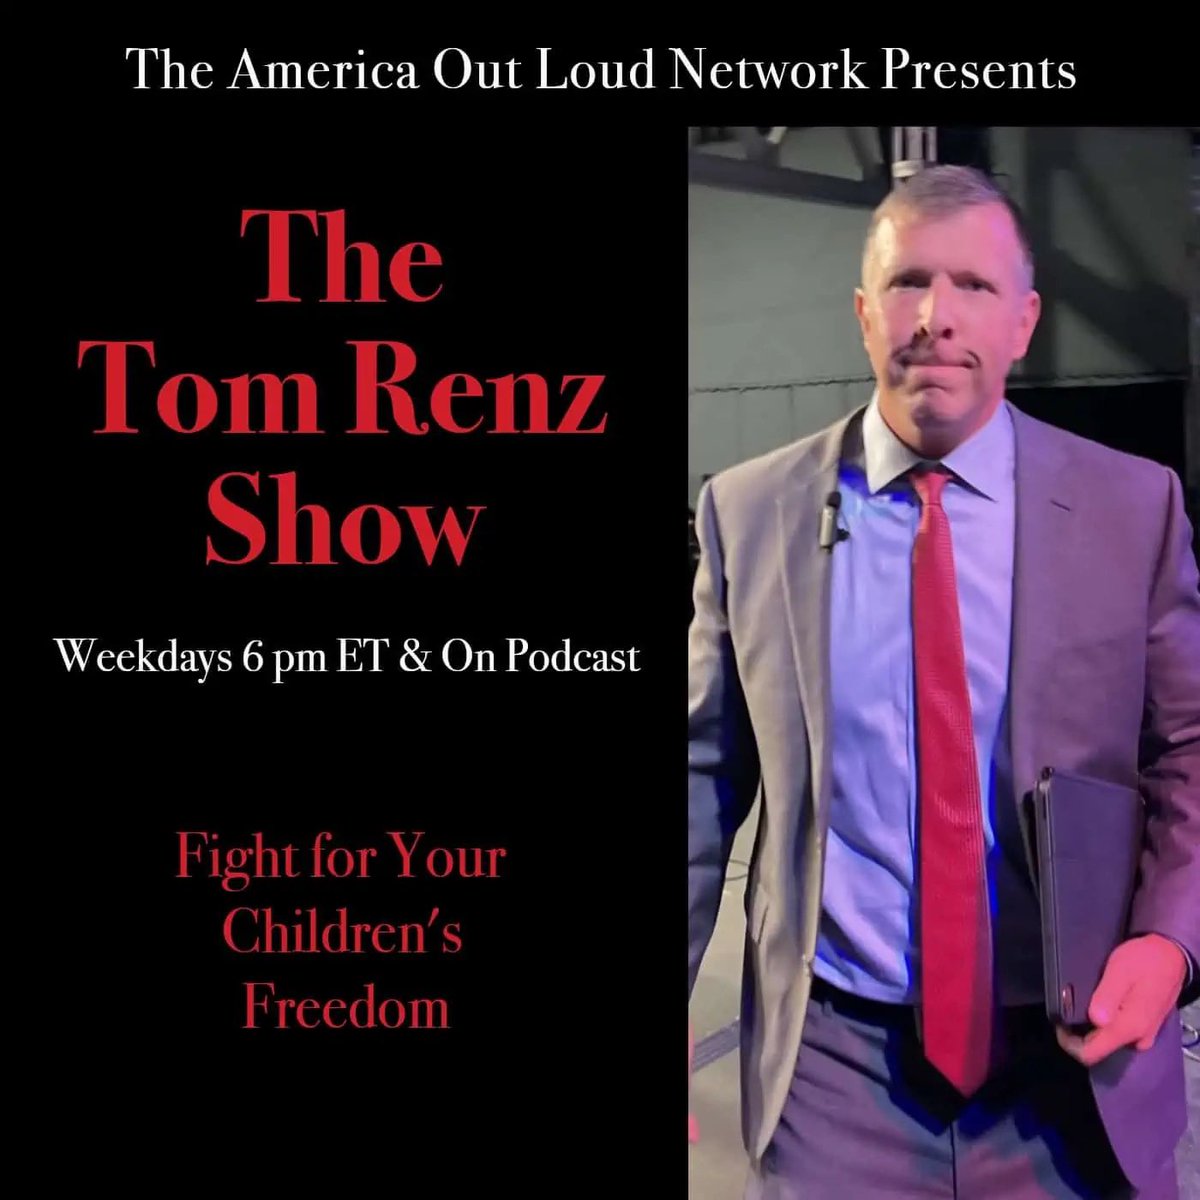 FRIDAY TALK🔺America Out Loud

6pm ET🔺The Tom Renz Show

The WHO Treaty & End of National Sovereignty
@RenzTom #ExitTheWHO 

#GetLoudAmerica 

LIVE rdo.to/TALKLOUD or I❤️RADIO bit.ly/2mBrCxE
@sovcoalition @endgendercide @naomirwolf @AmericanMD @GingerBreggin